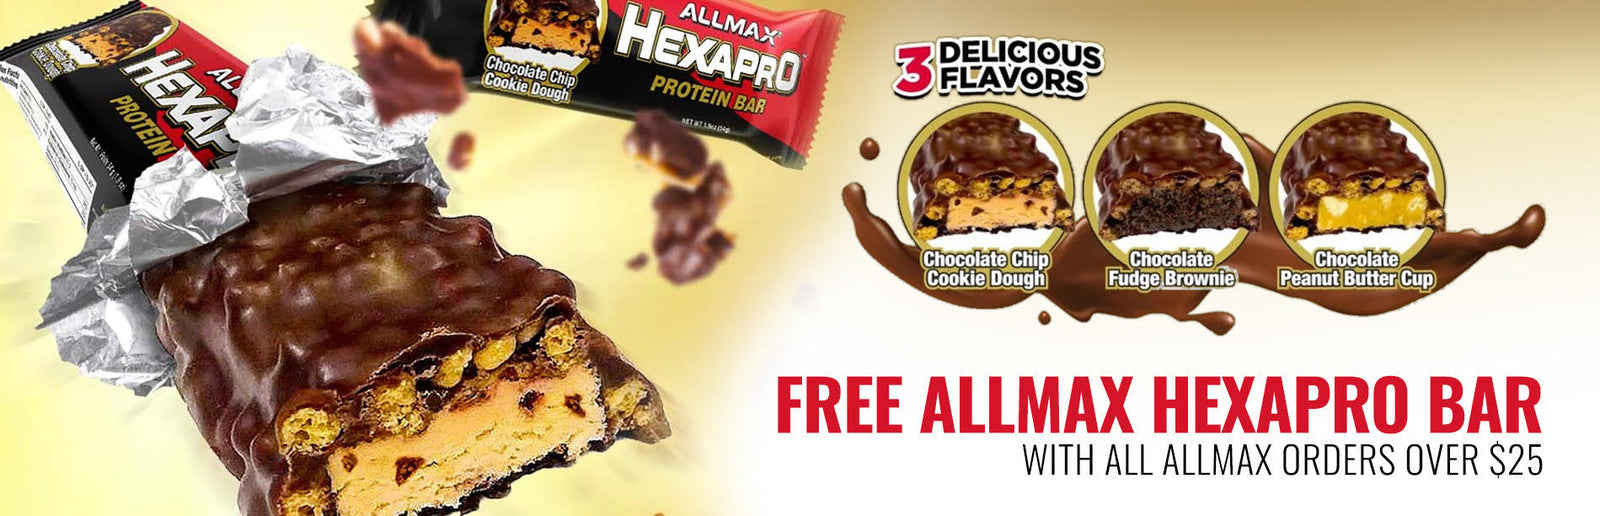 AllMax Nutrition Teams Up with PoorBoy with Free Protein Bars